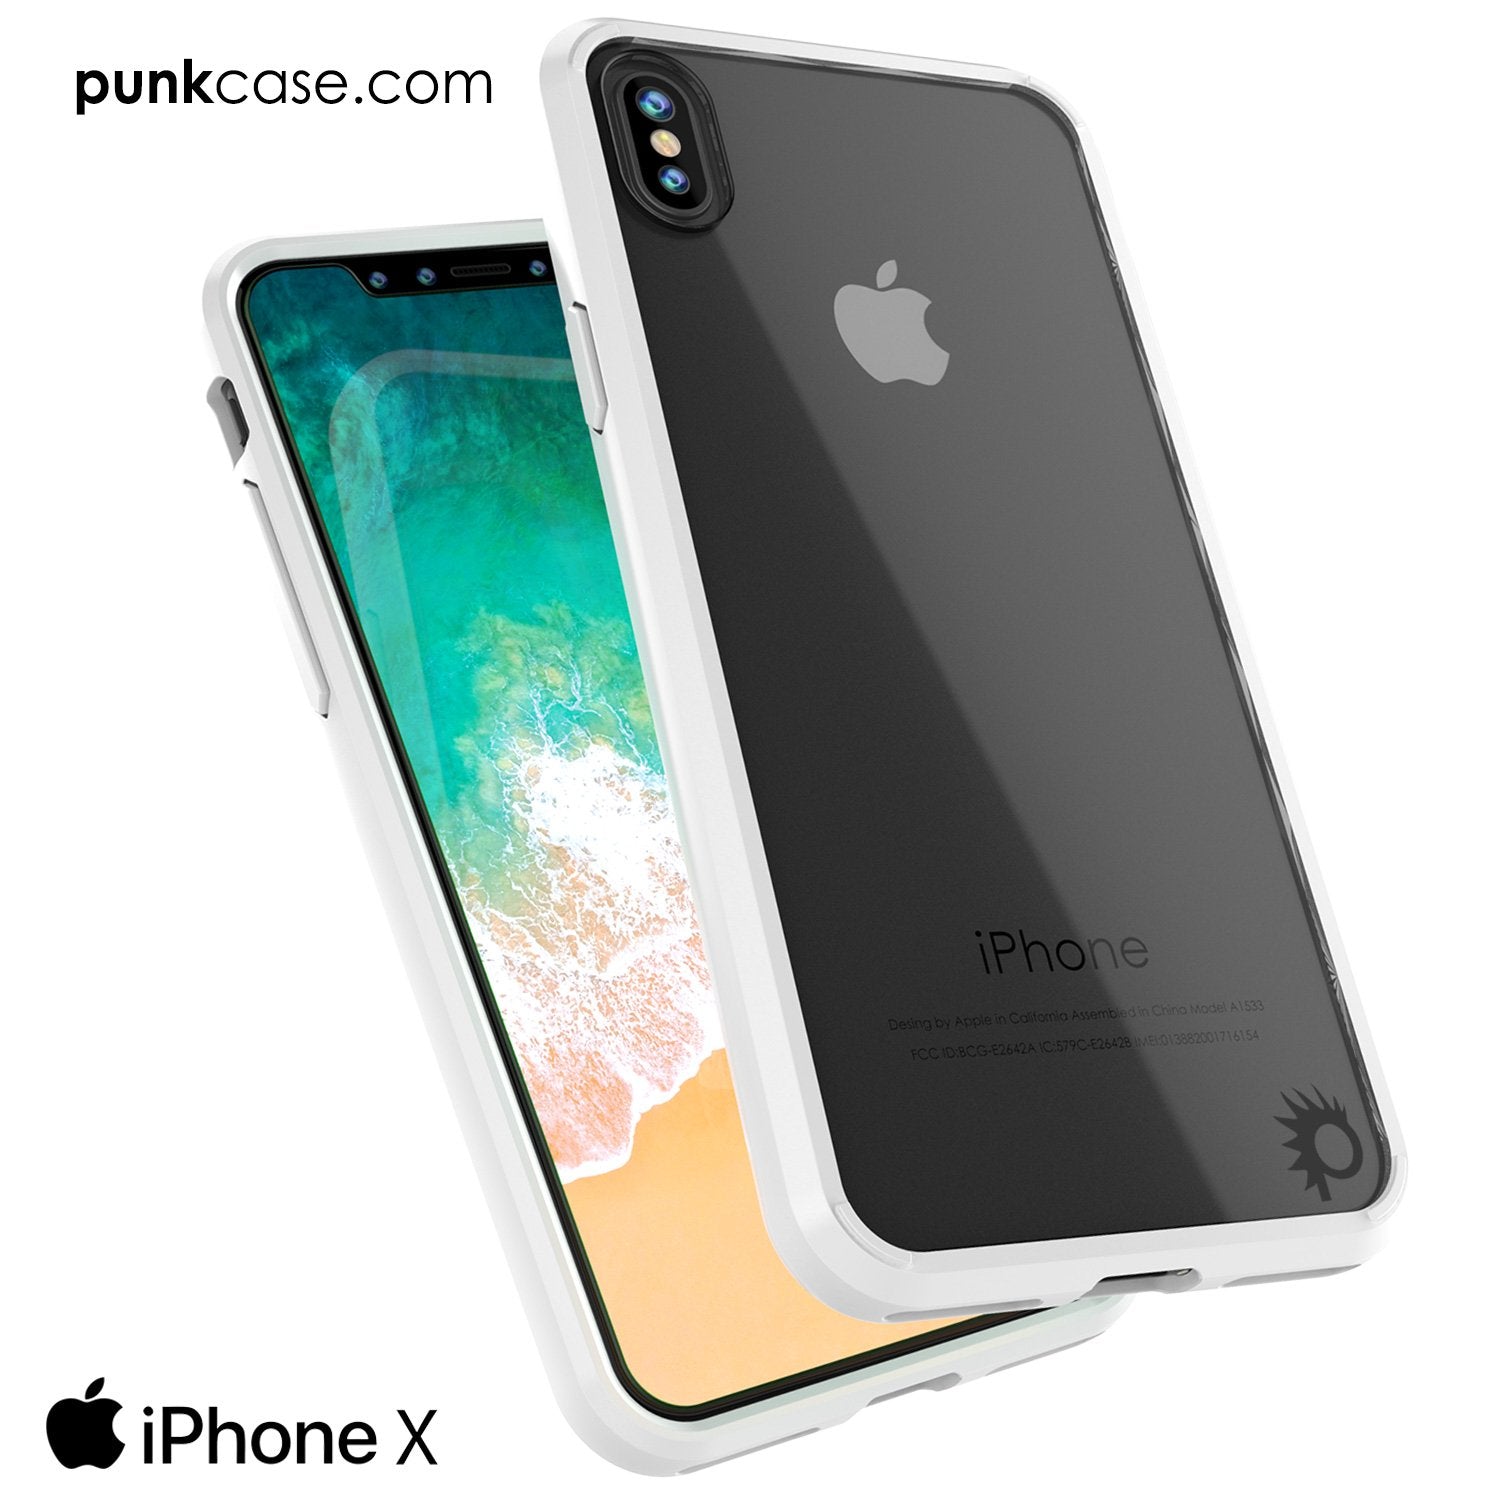 iPhone X Case, PUNKcase [LUCID 2.0 Series] [Slim Fit] Armor Cover W/Integrated Anti-Shock System & Tempered Glass PUNKSHIELD Screen Protector [White]